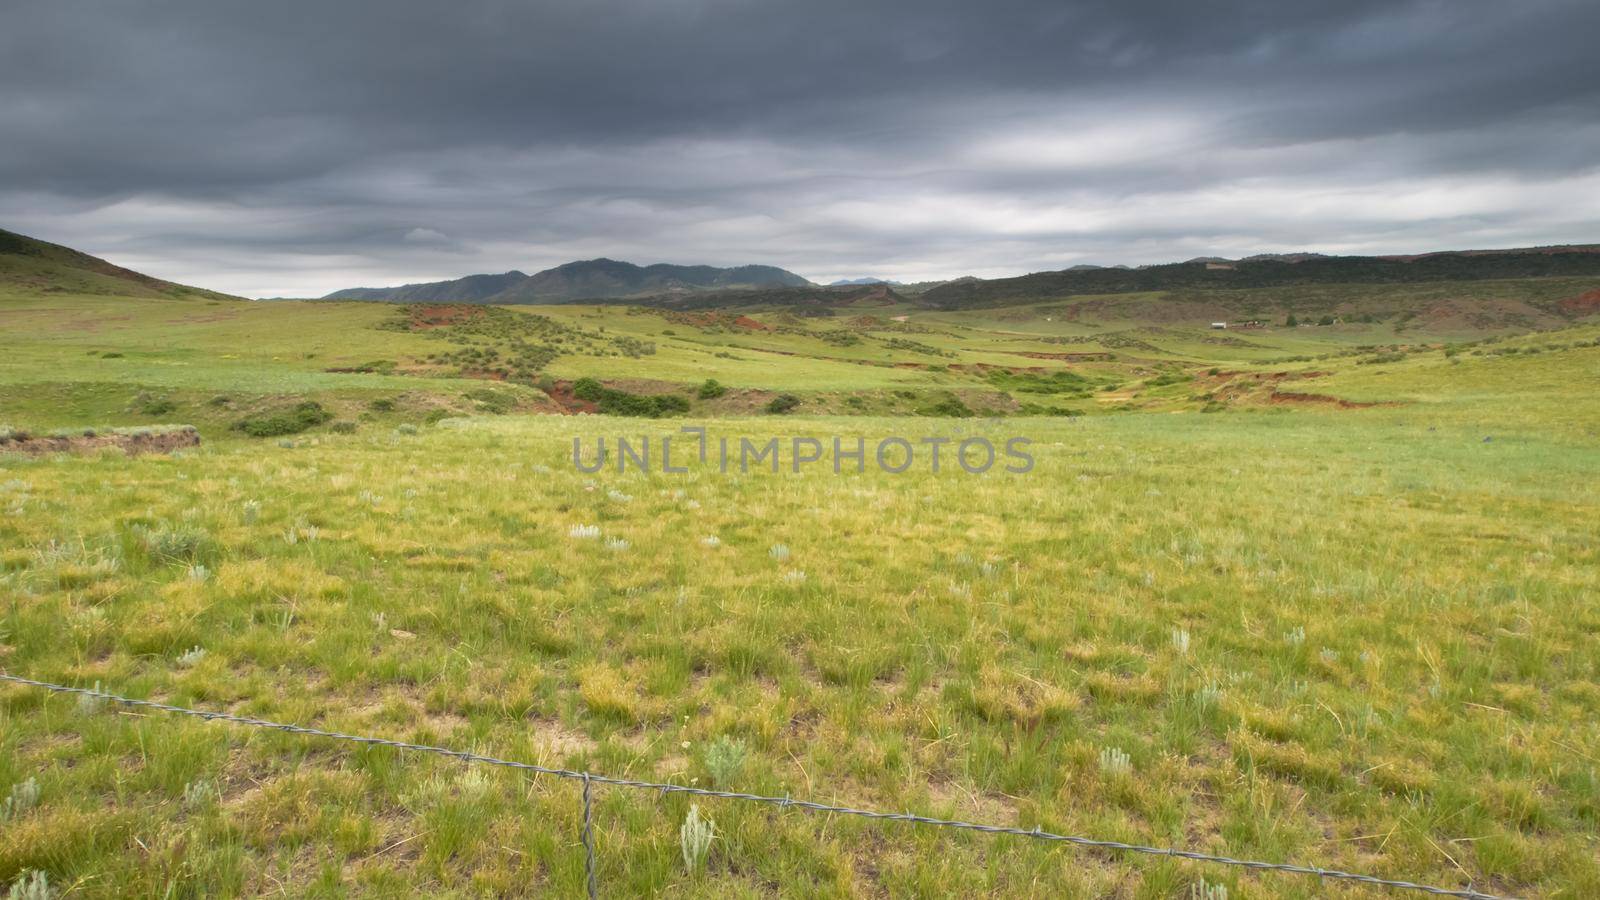 Foothill landscape in Fort Colling, Colorado.